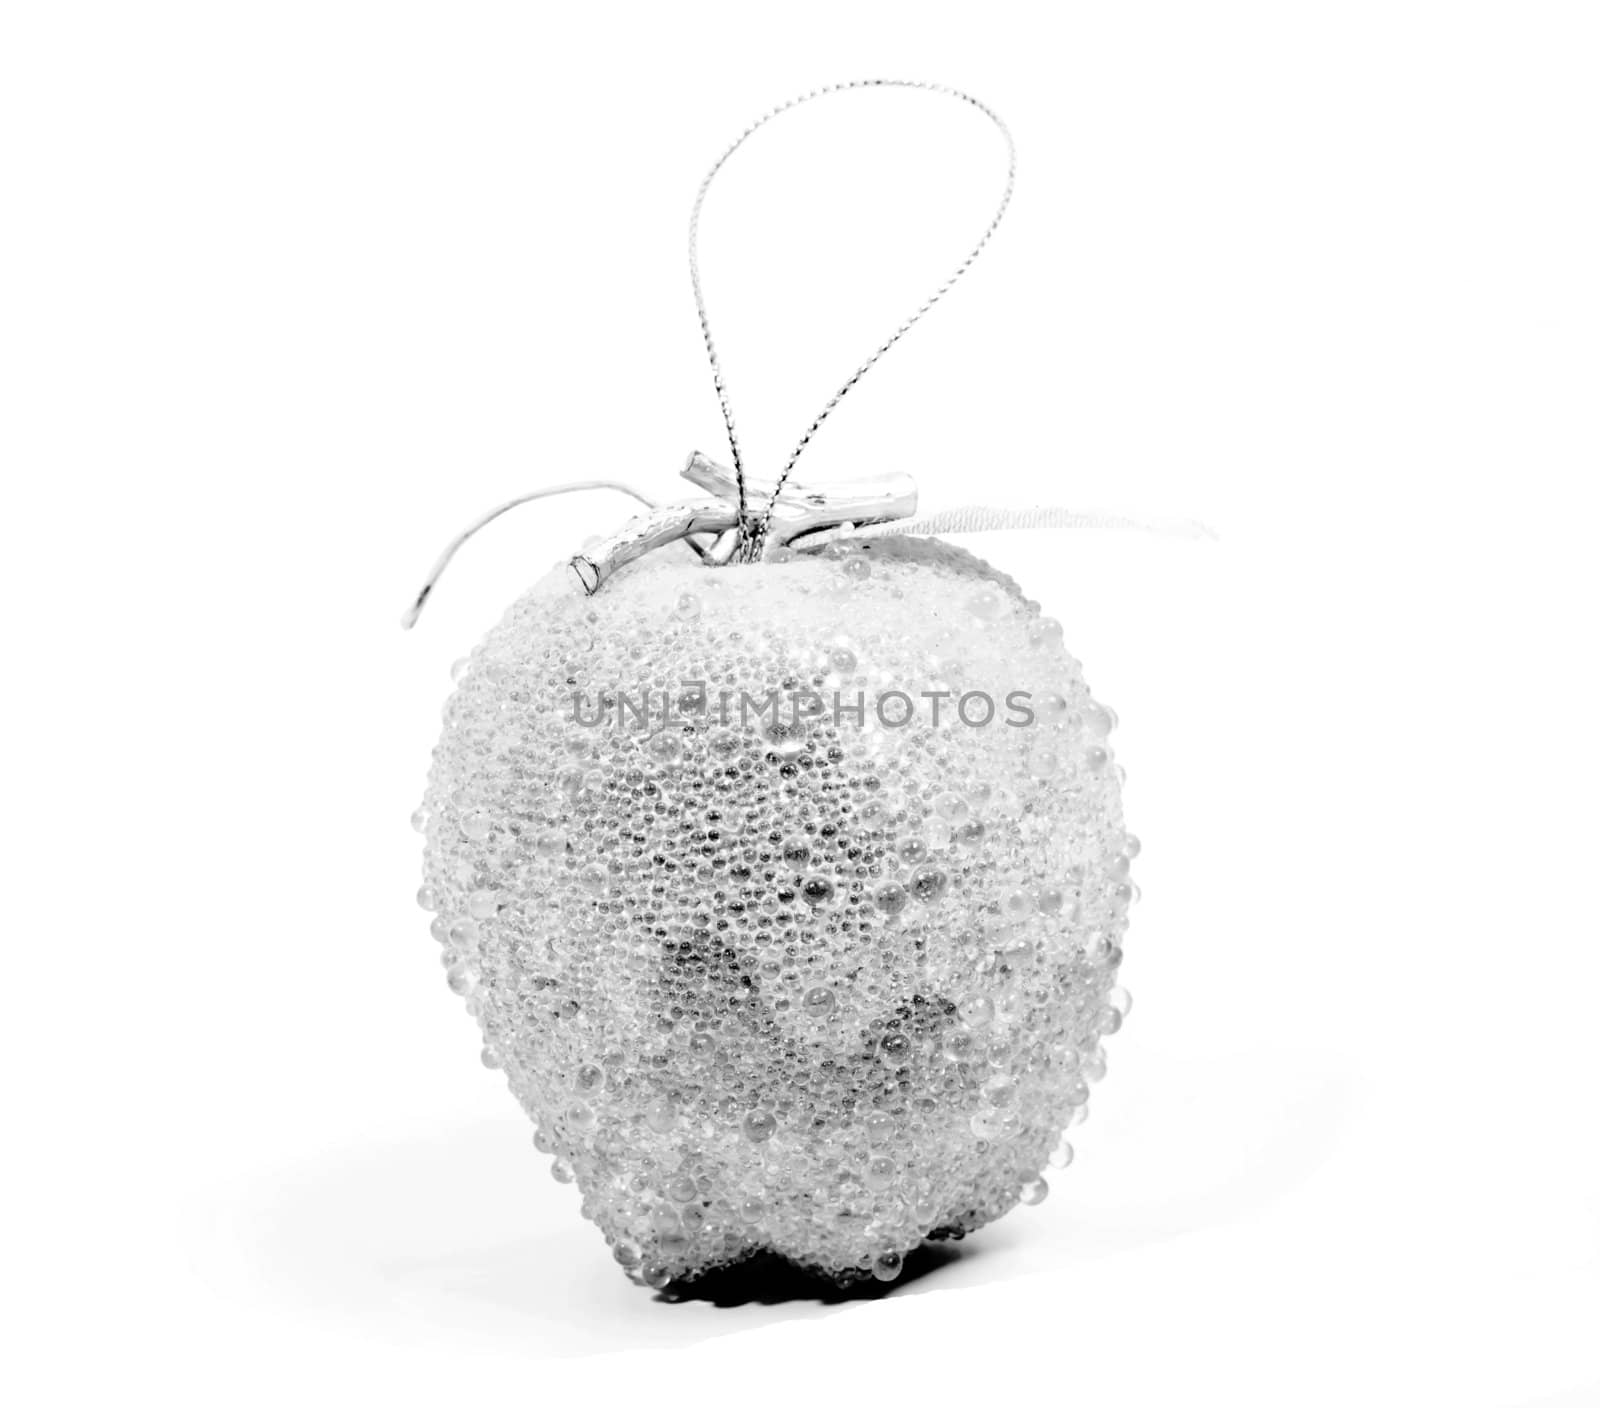 Silver apple decoration on white background